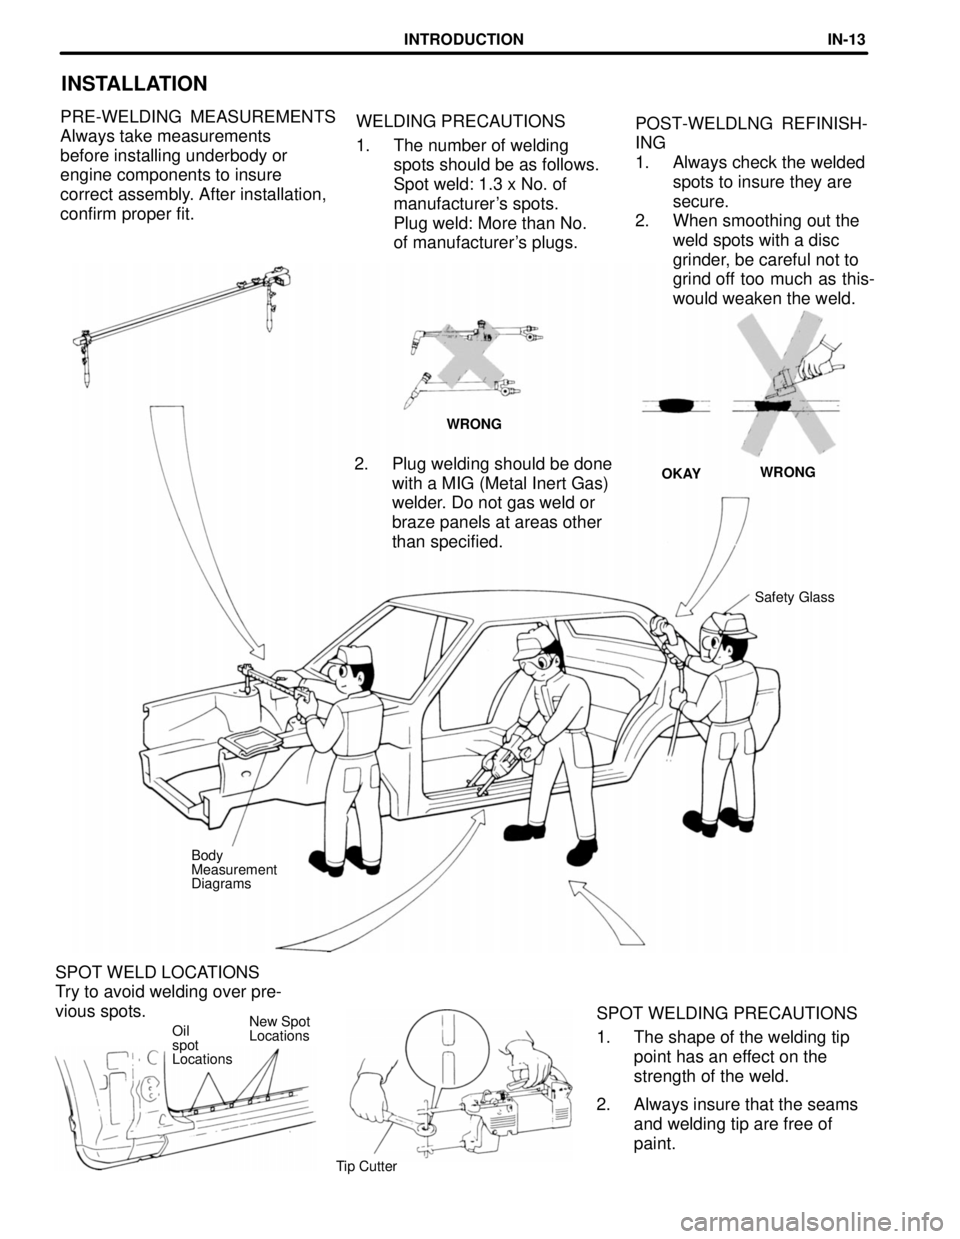 TOYOTA SUPRA 1997  Service Repair Manual SPOT WELD LOCATIONS
Try to avoid welding over pre-
vious spots.
New Spot
Locations
WELDING PRECAUTIONS
1. The number of welding
spots should be as follows.
Spot weld: 1.3 x No. of
manufacturers spots